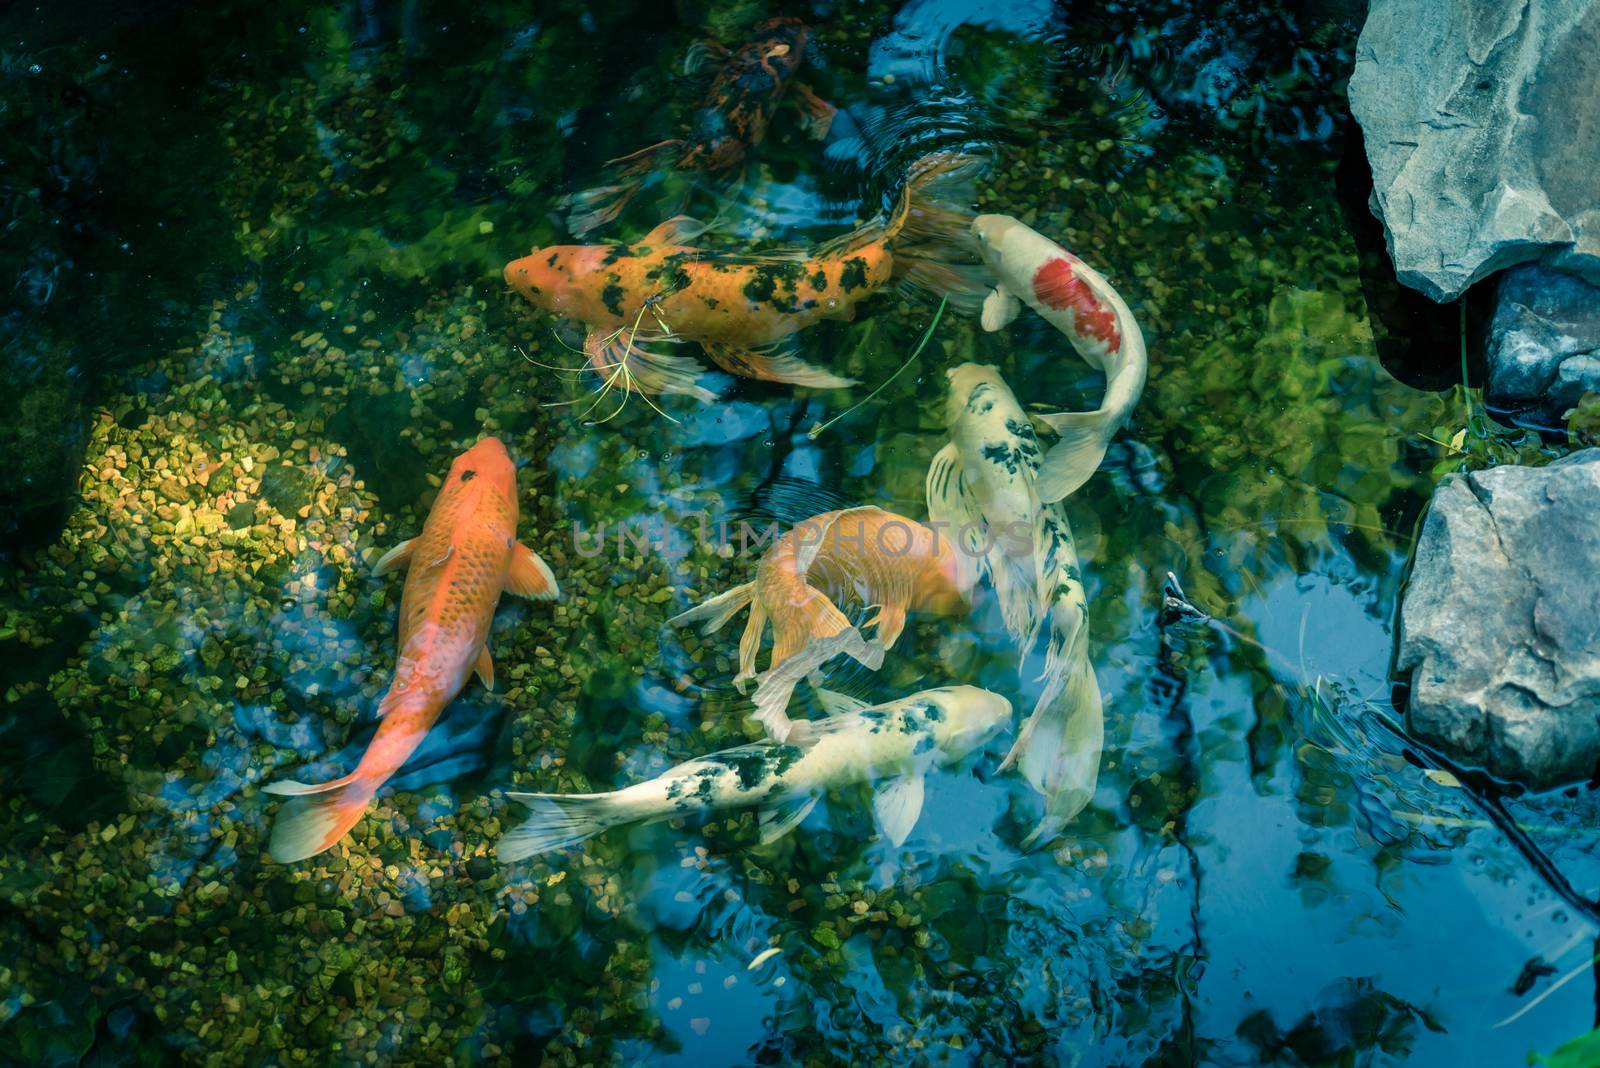 Water garden with landscaping rocks and colorful koi fishes swimming near Dallas, Texas, USA by trongnguyen